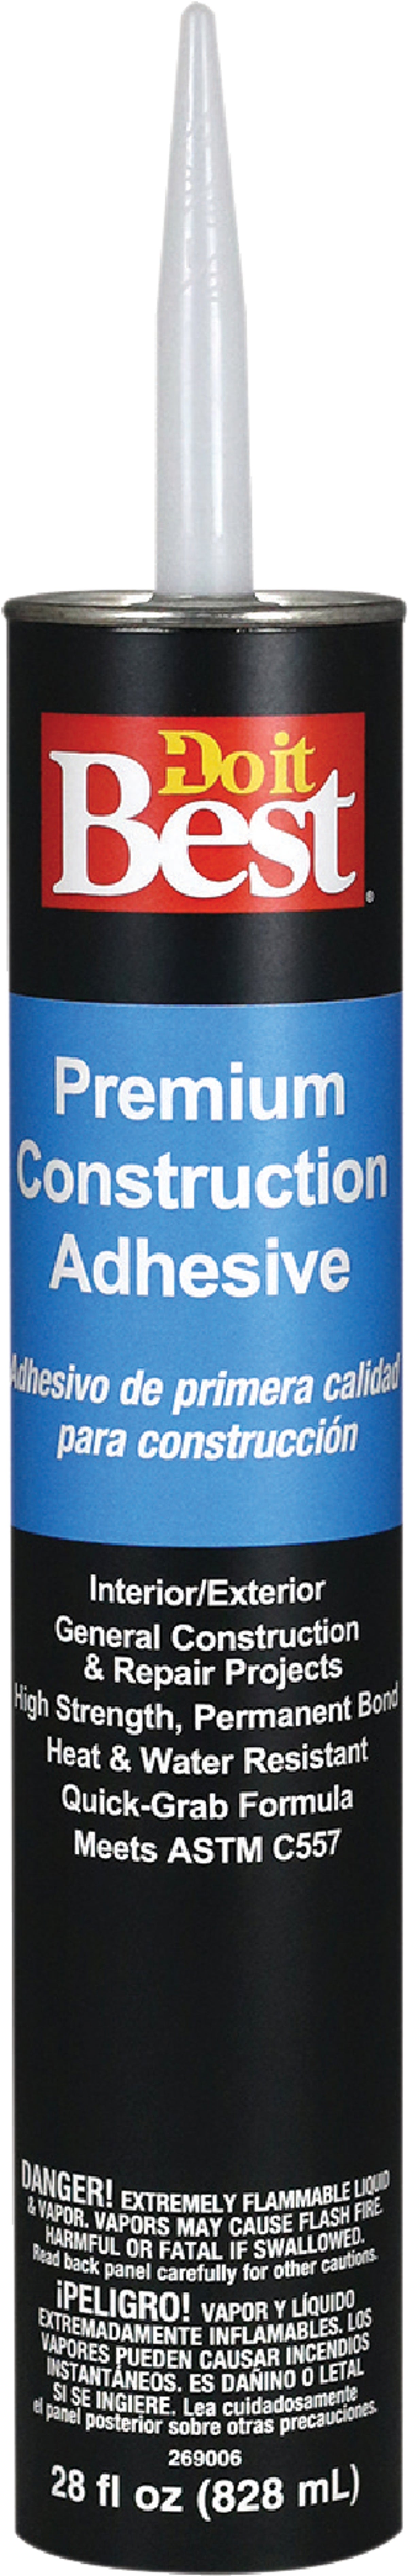 F26 Heavy Adhesive Glue (For Address Numbers) - Addresses of Distinction